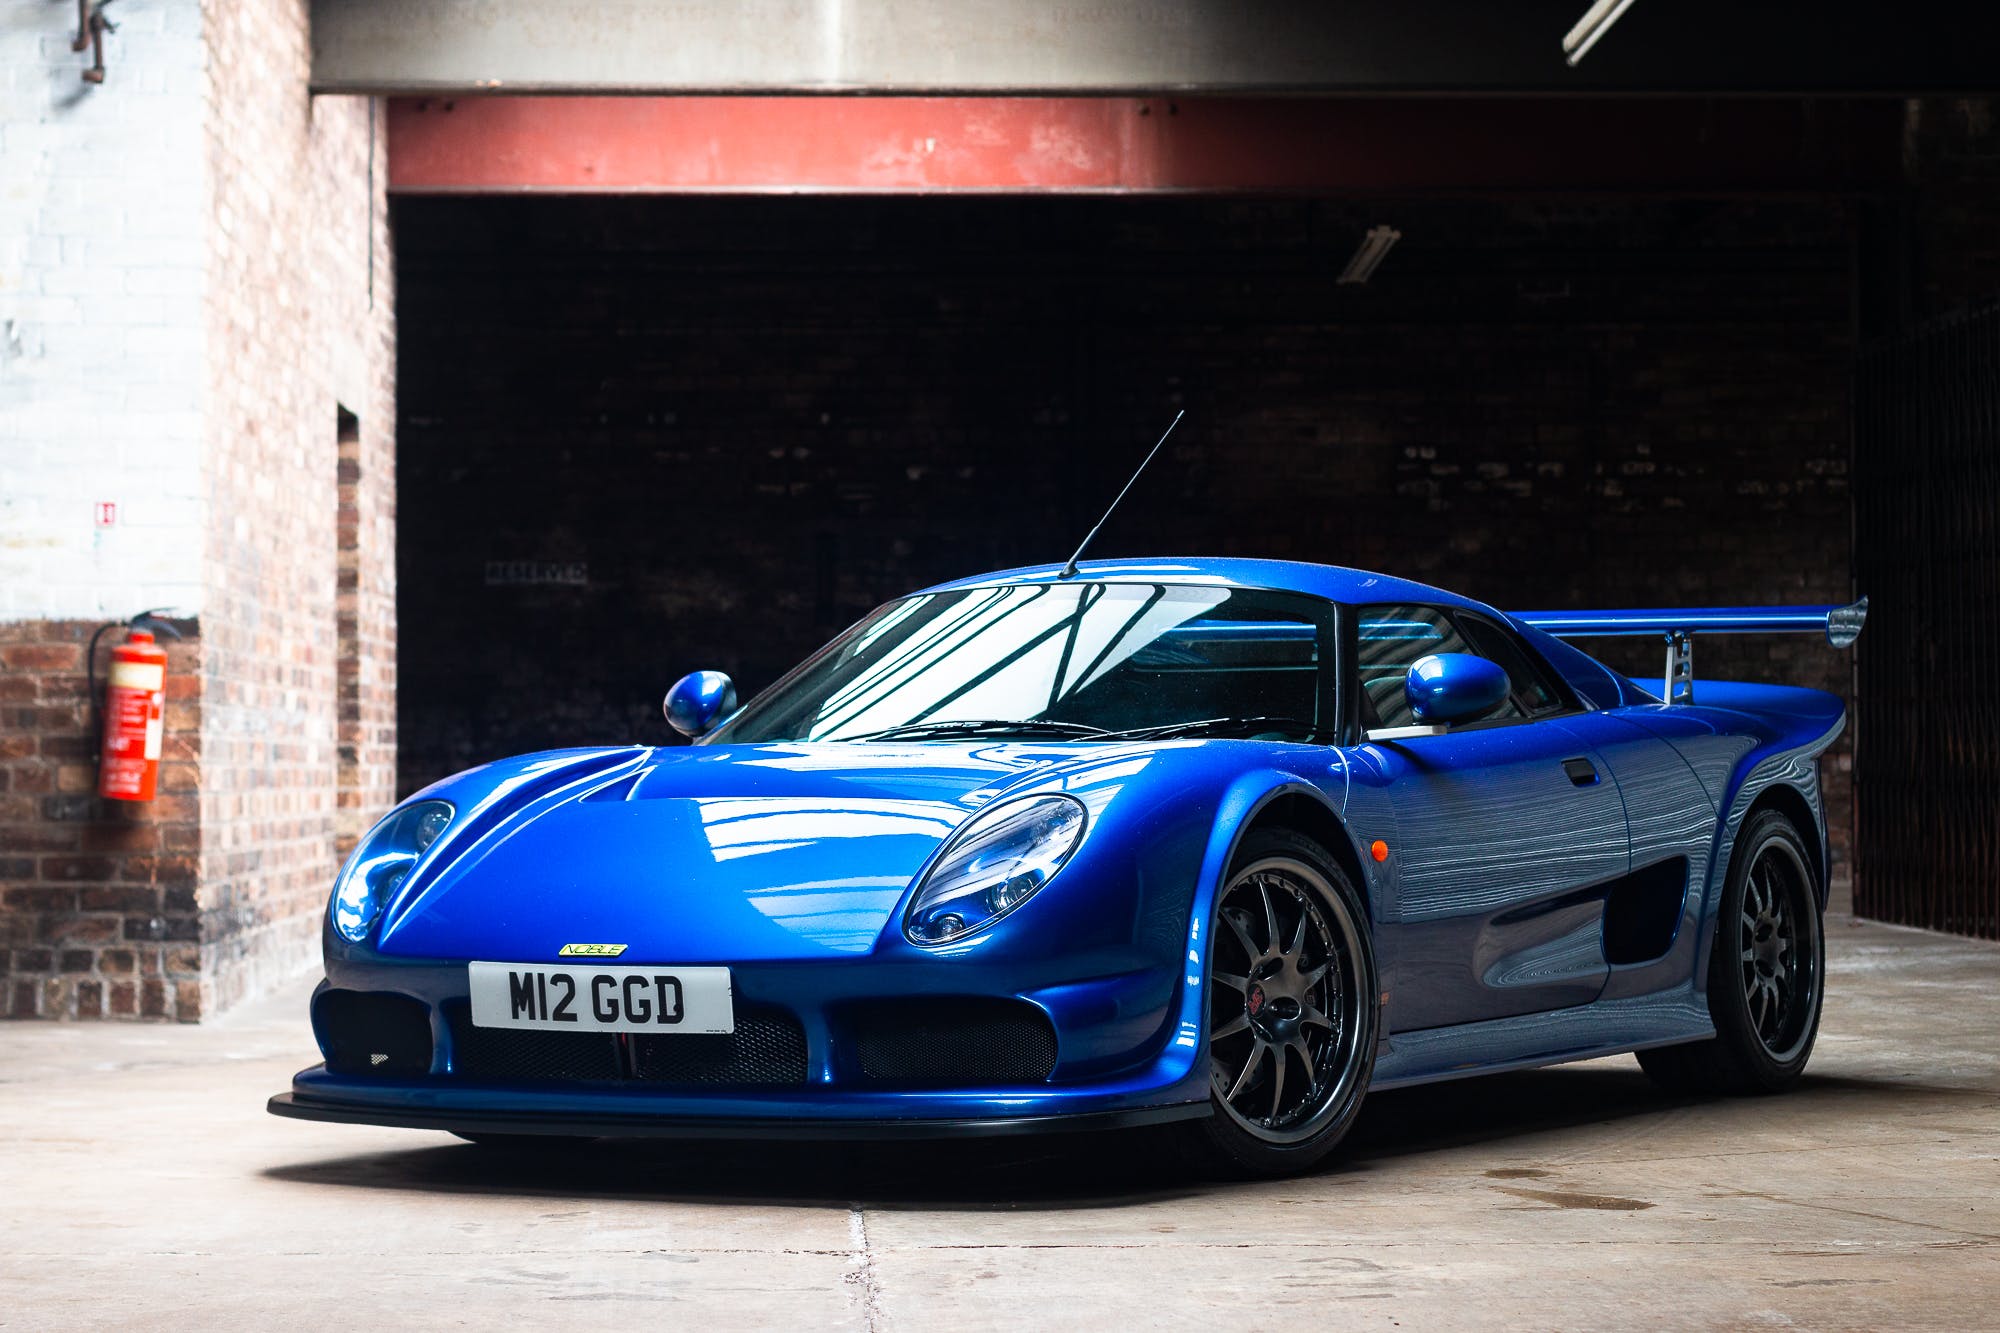 20 years ago the Noble M12 slayed the supercar dynasty